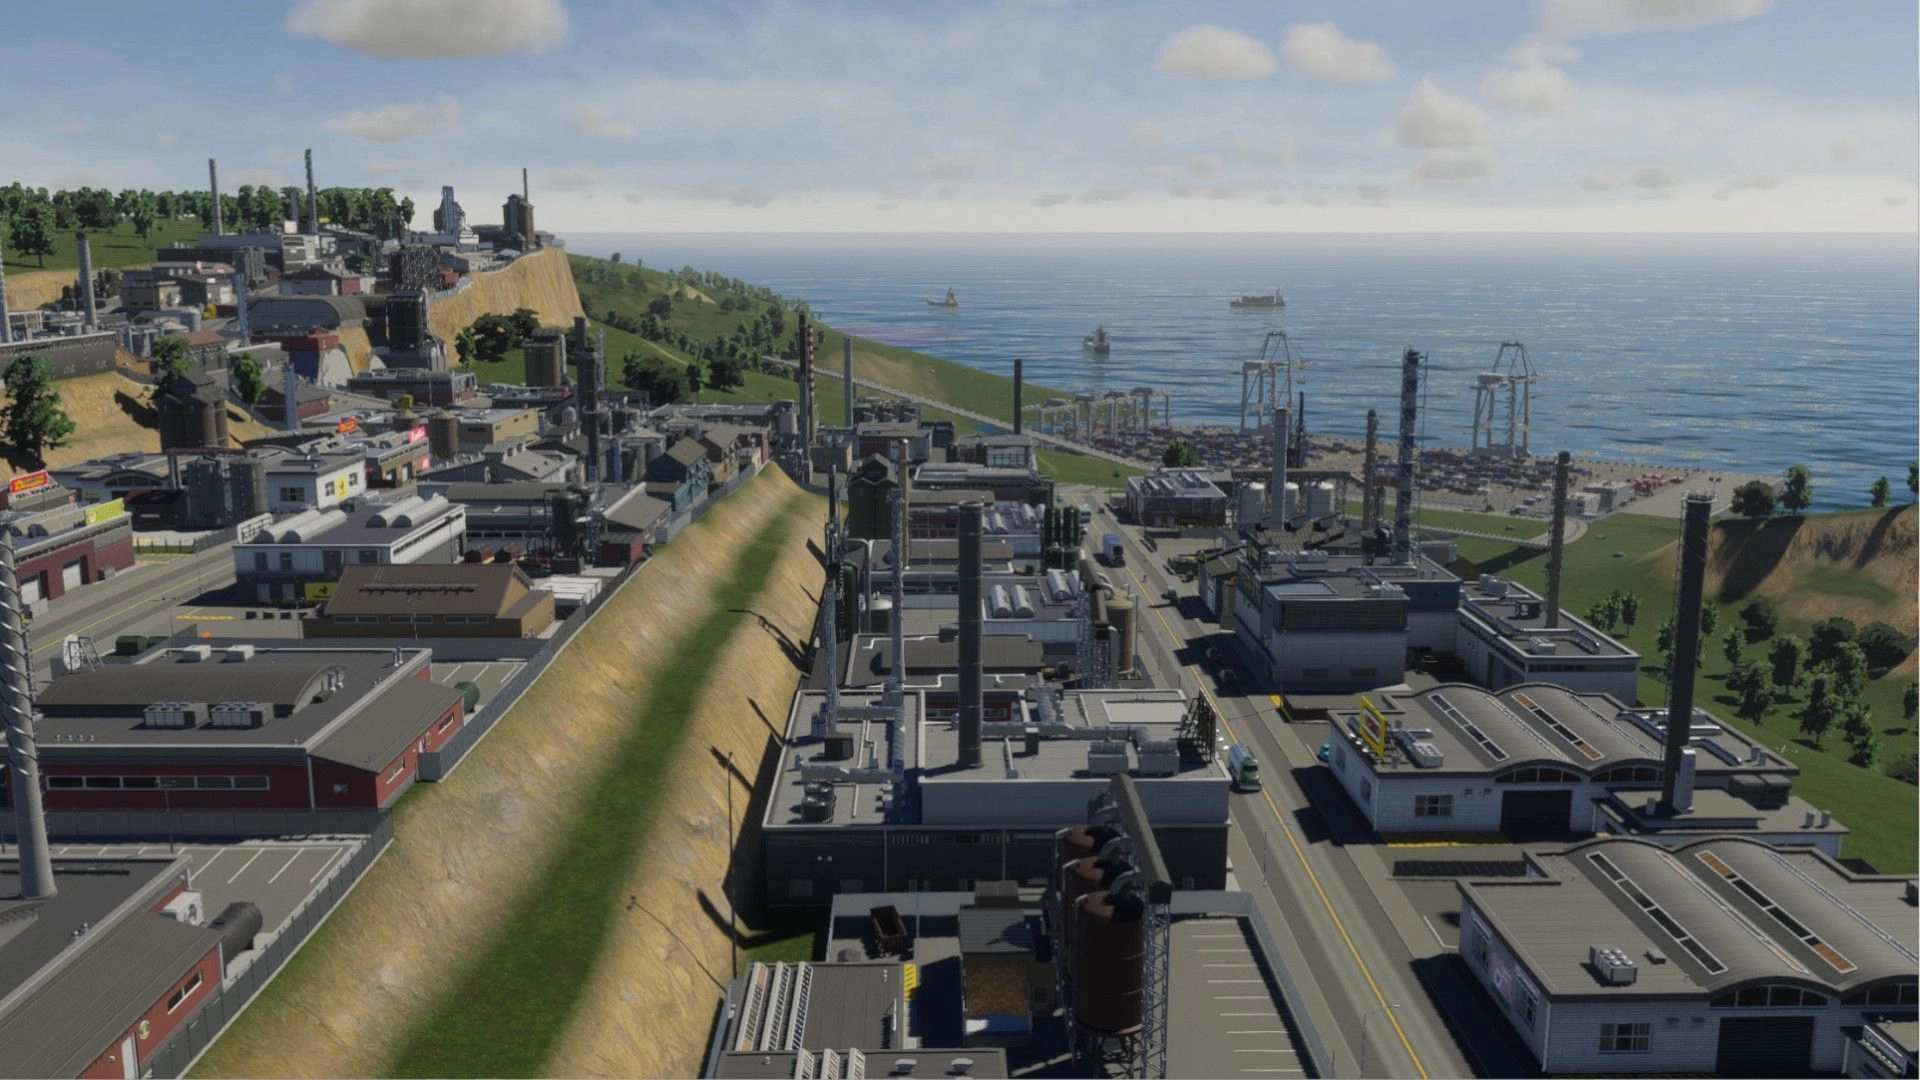 Performance of Cities Skylines 2 Improves After First Patch